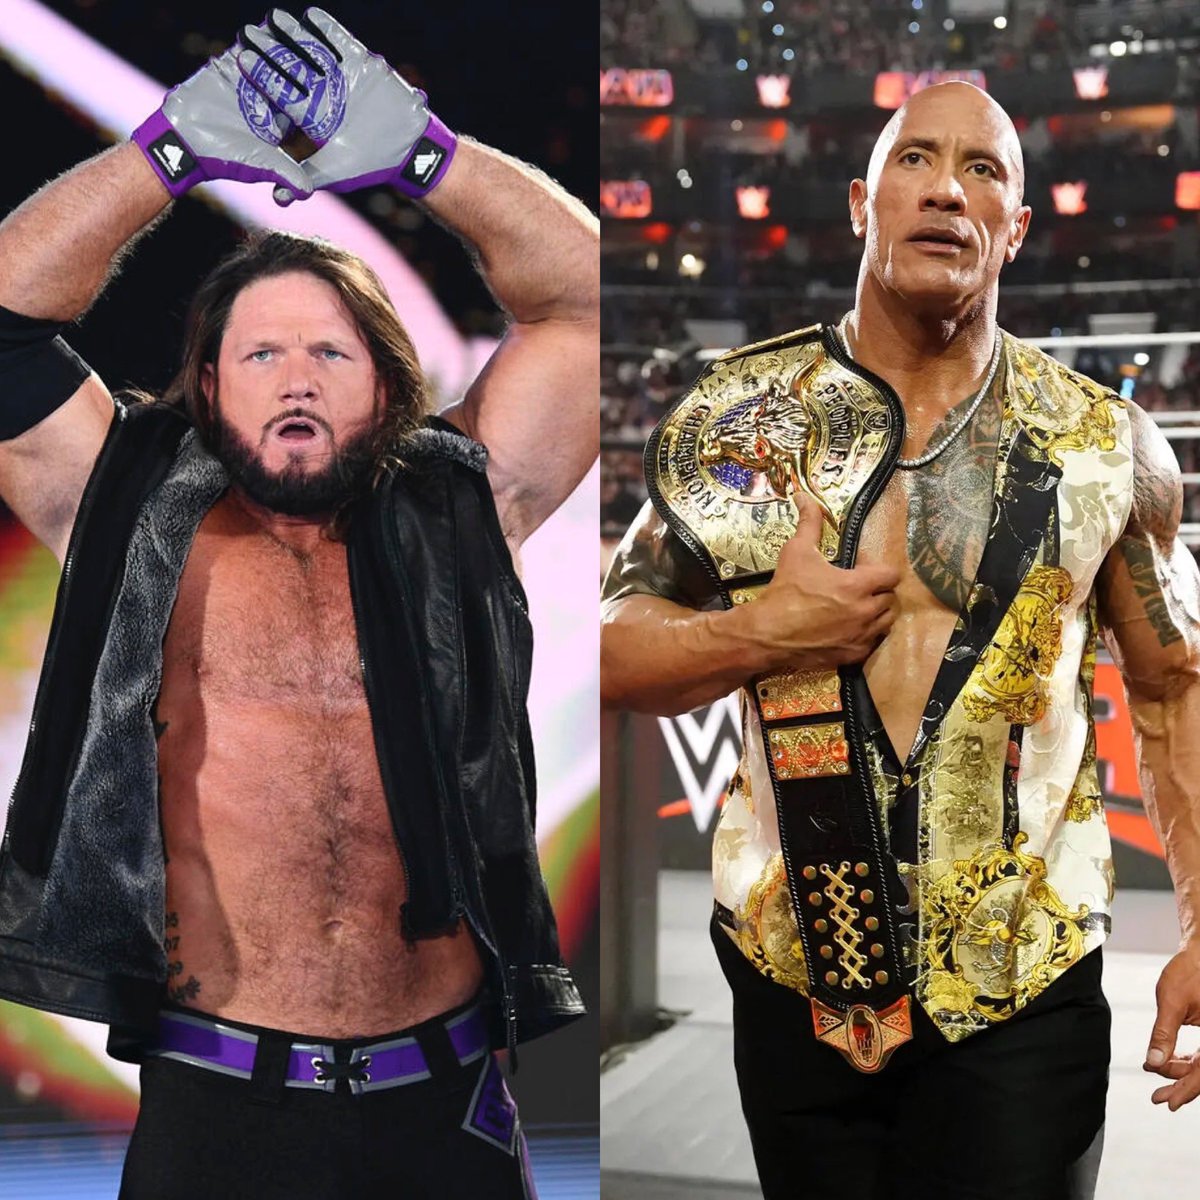 AJ Styles wants a match with The Rock. “I’m interested, but only if that means The Rock is turning babyface. I’m not interested in being a mediocre bad guy. I want to bring this to a whole new level.” (Interview w/Sports Illustrated)